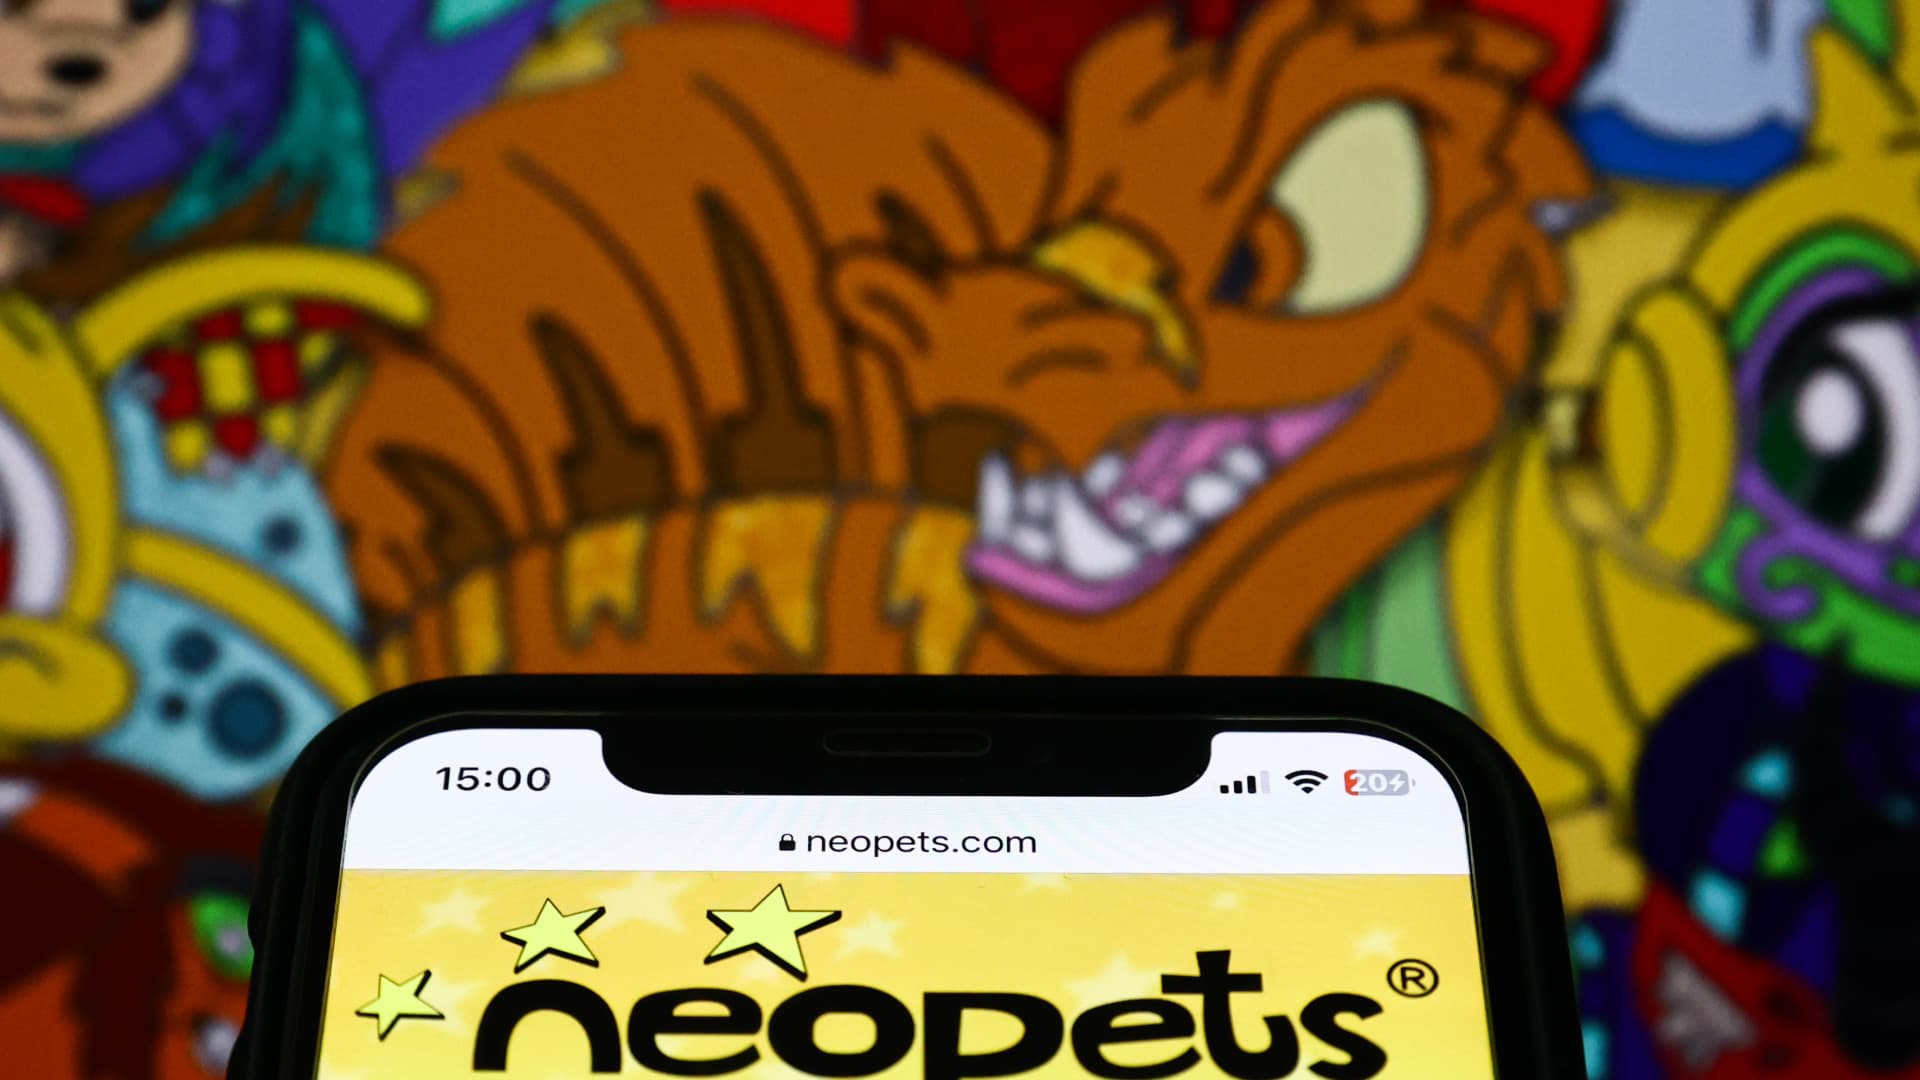 Neopets is under new administration and planning a comeback in a vastly diversified skills of gaming